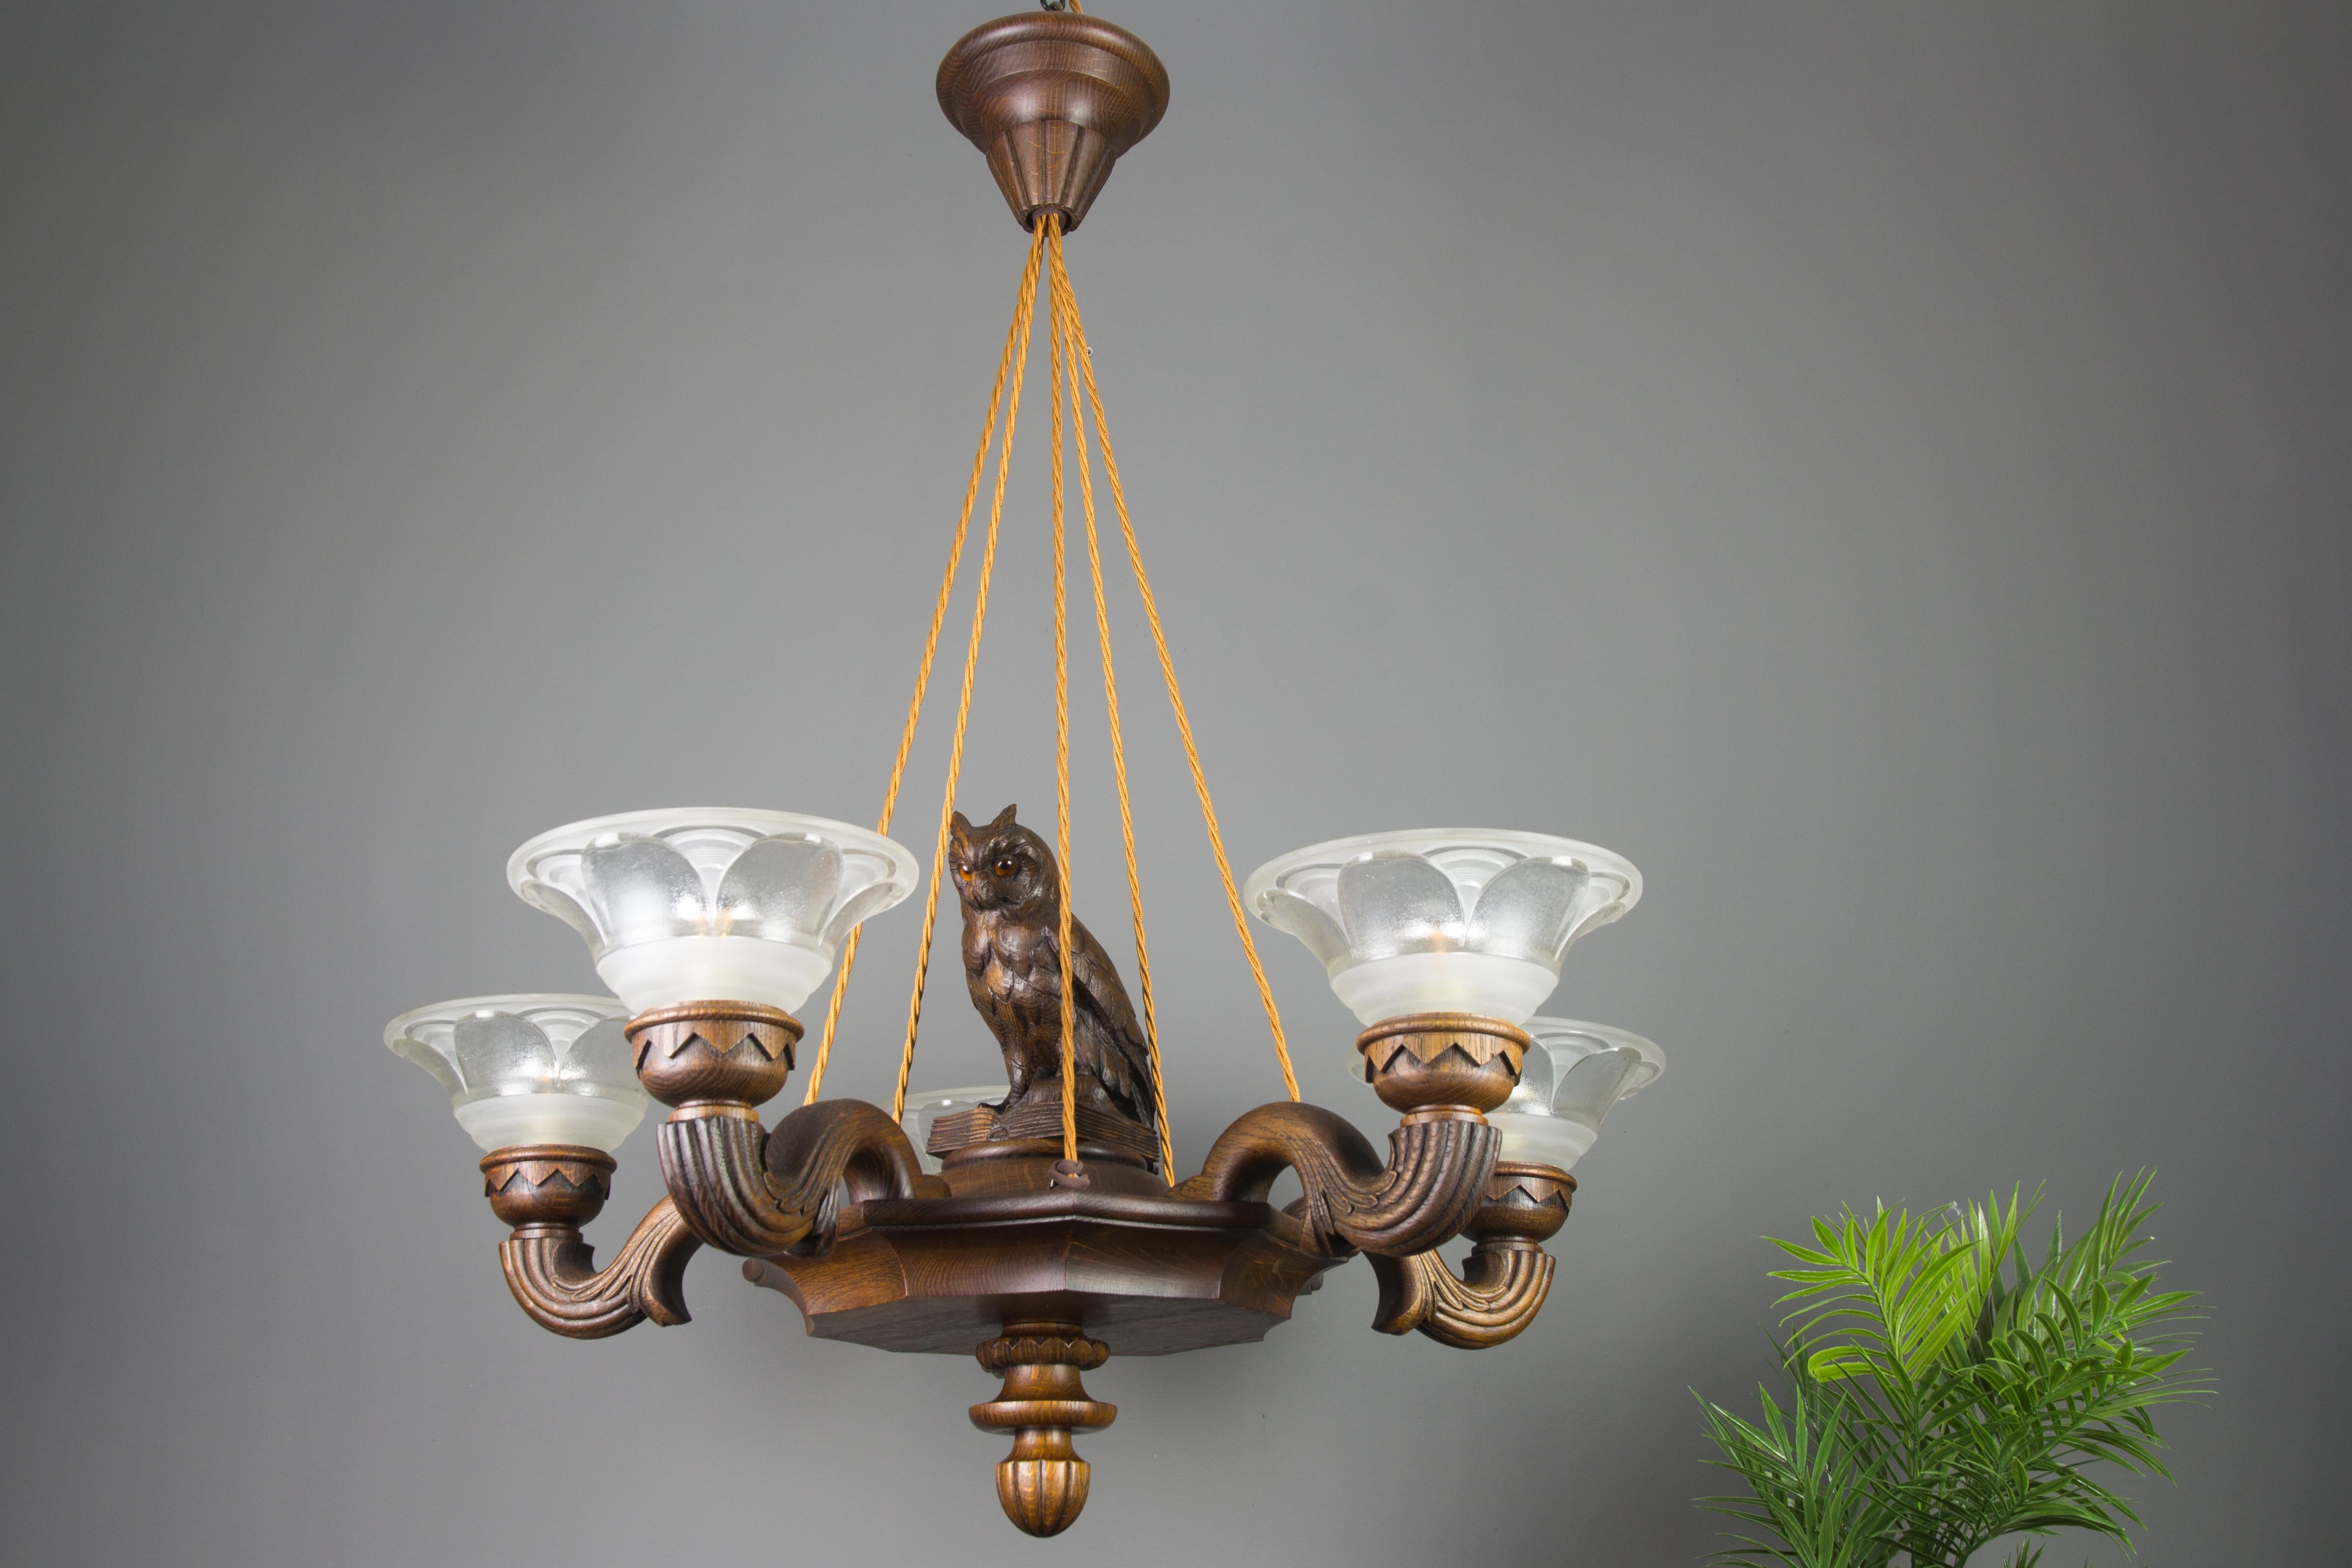 Beautifully carved wooden chandelier with five arms, each with a wonderfully shaped glass lampshade made and marked by Ezan, France. This large antique chandelier features an adorable owl figure sitting on an open book in the center of the